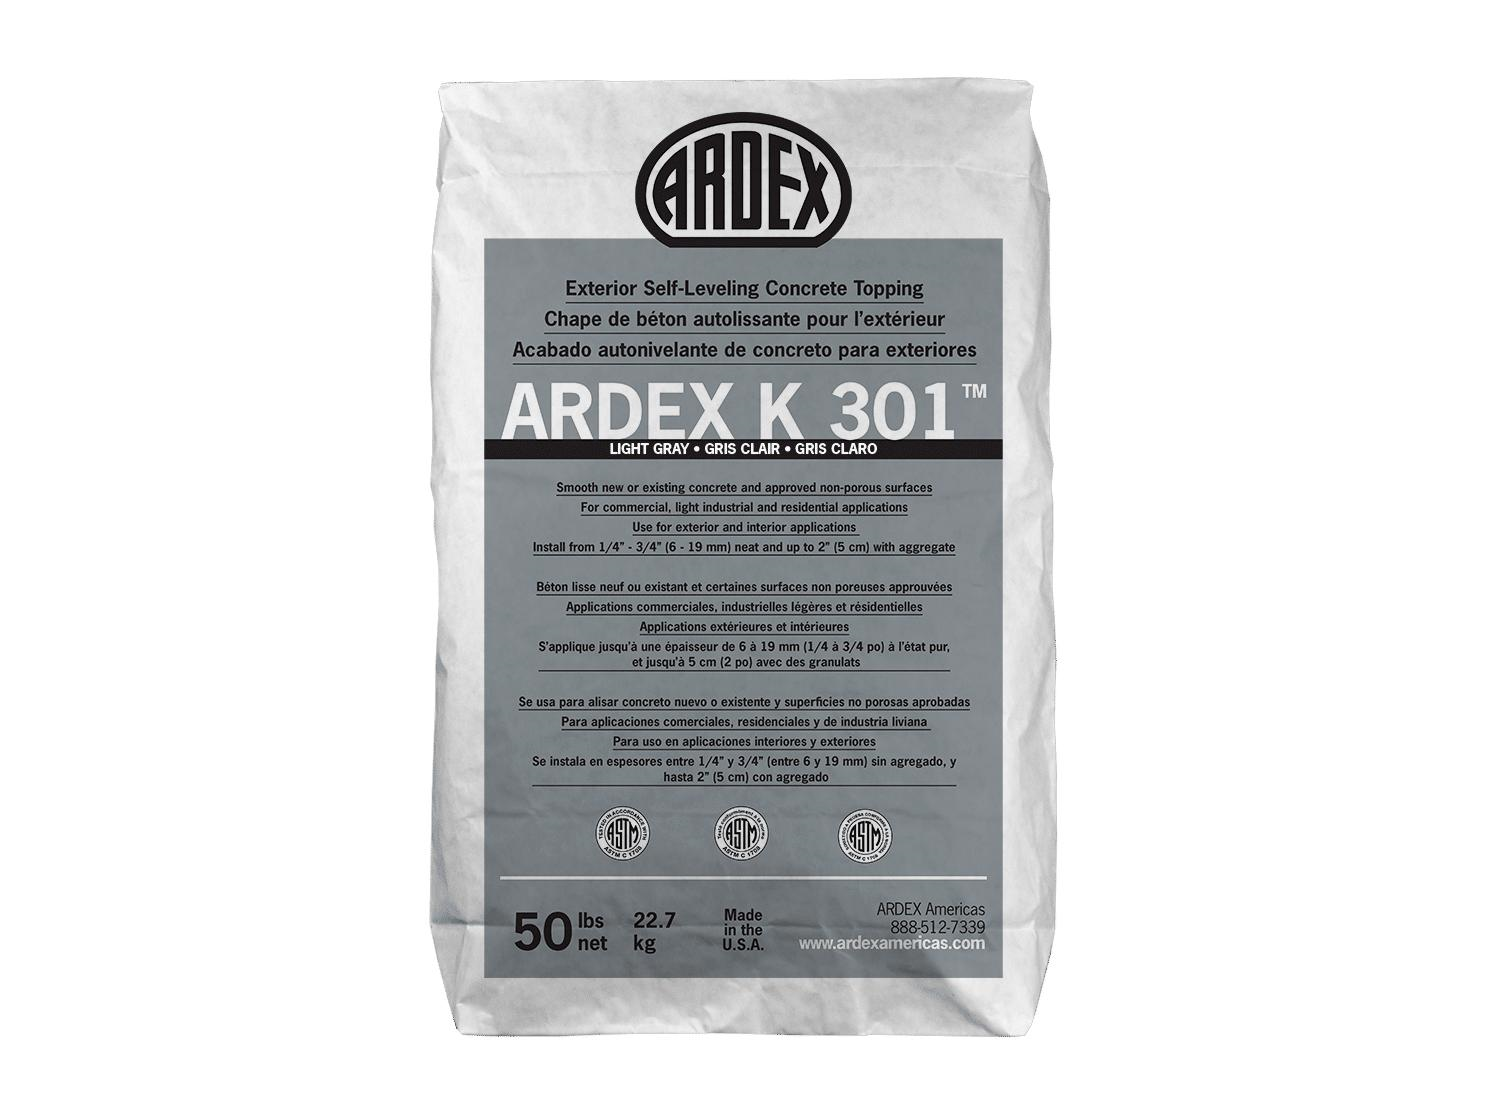 Ardex (12435) product